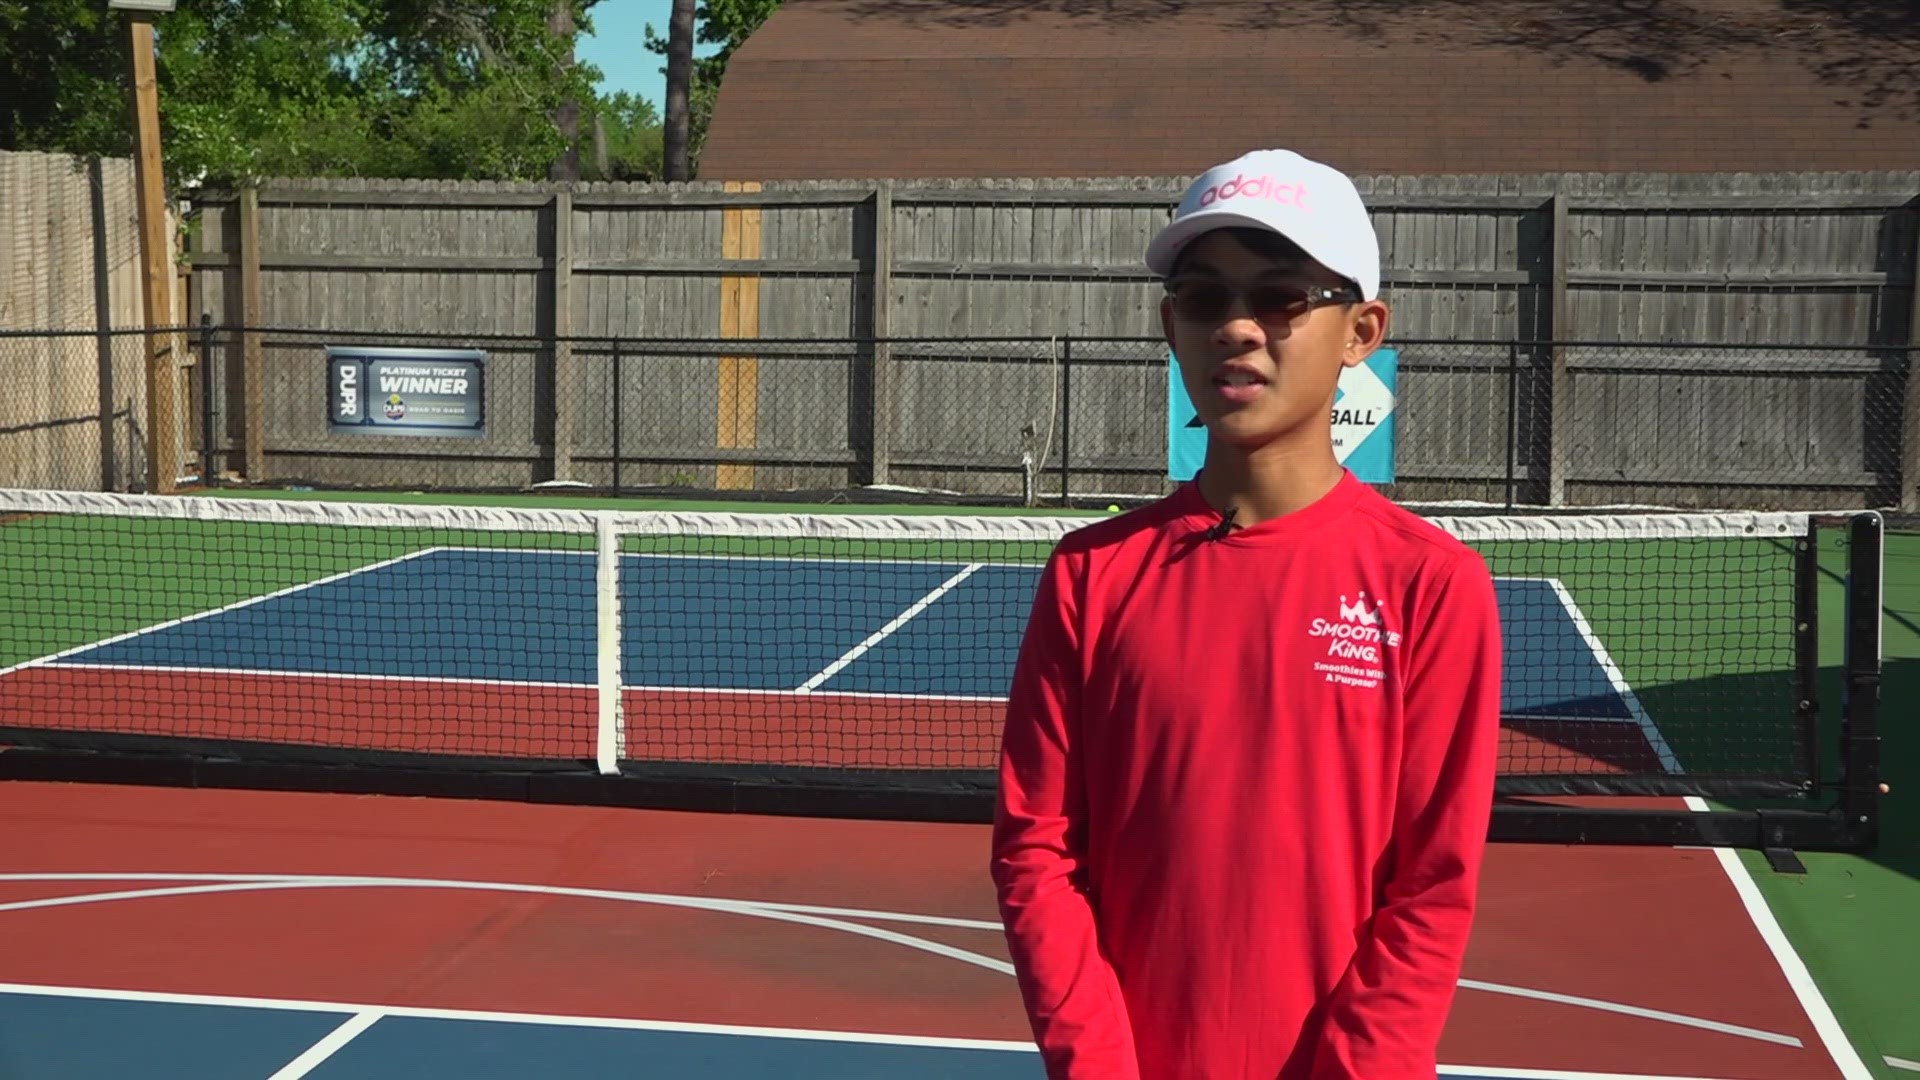 Rex Thais shares how his professional start is happening not only in Florida, but overseas.